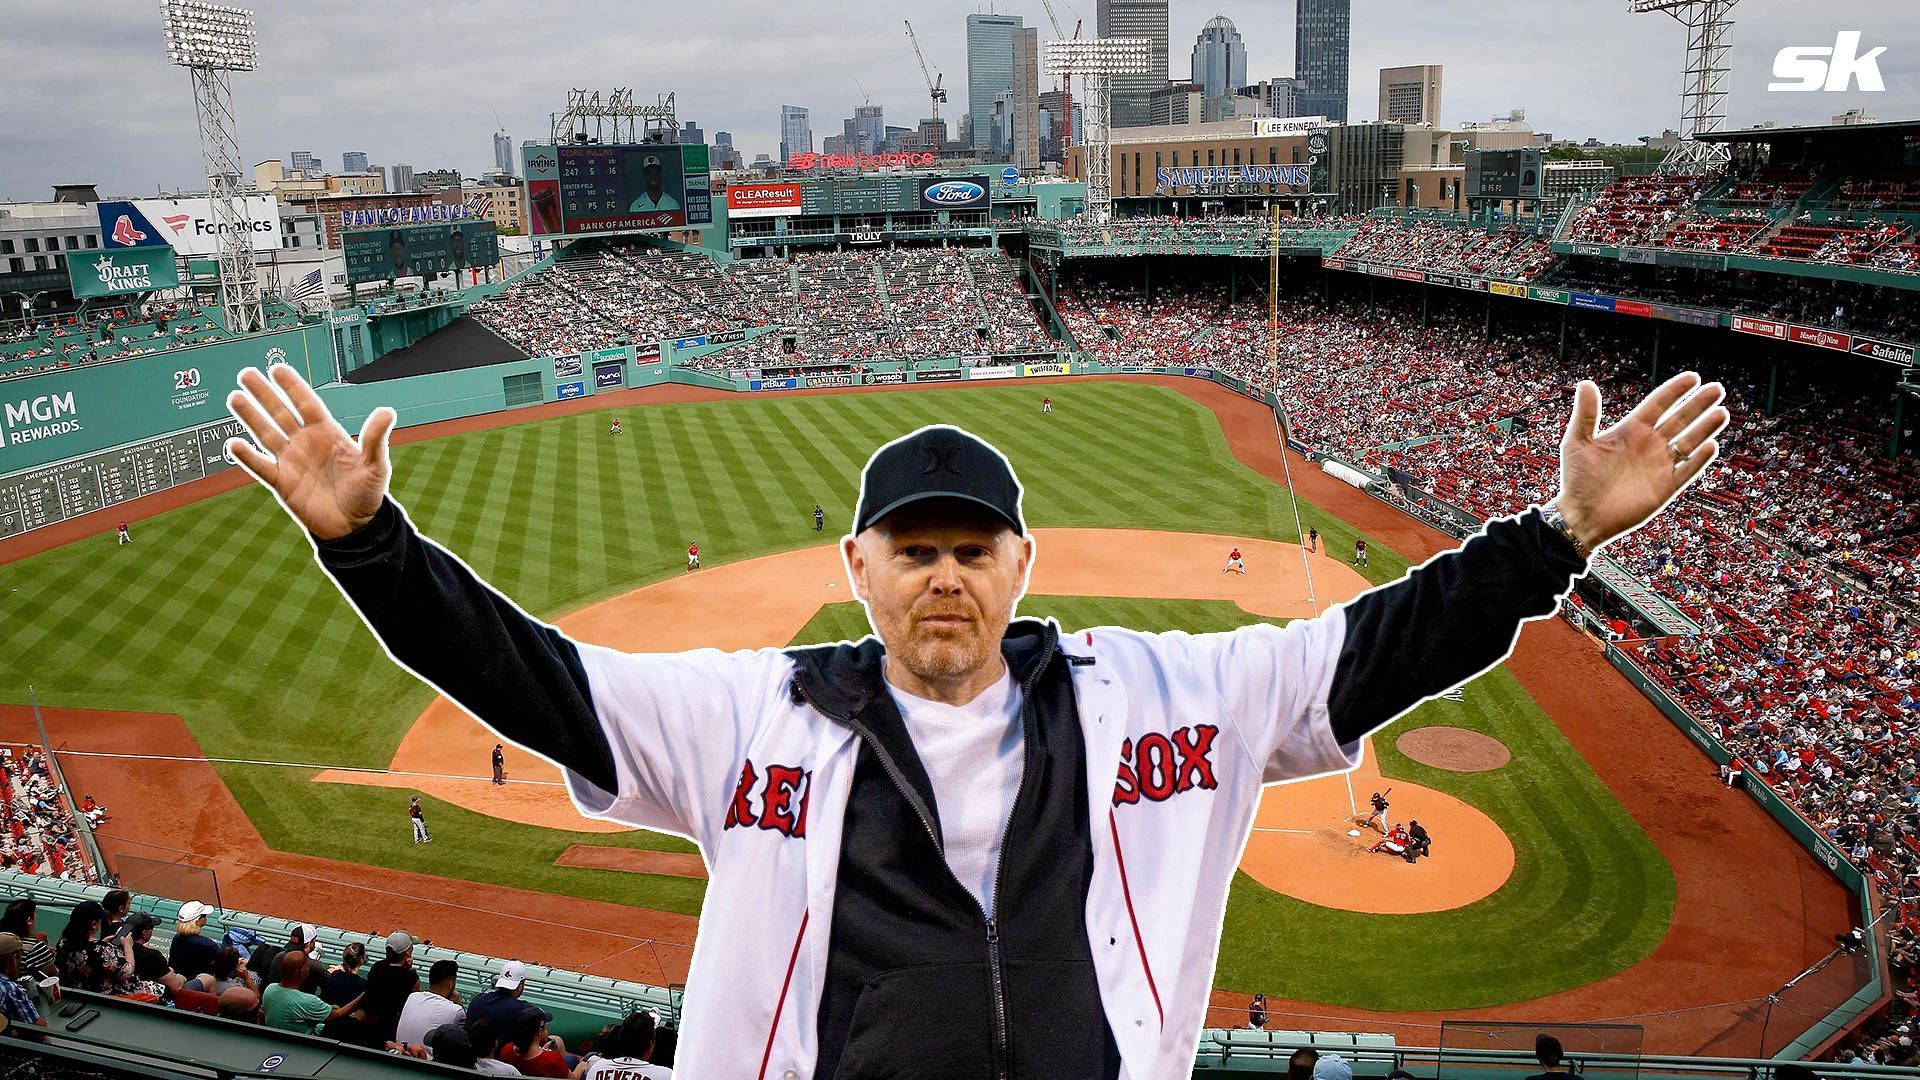 Comedian Bill Burr looks upon his record-setting show in Boston with fond memories